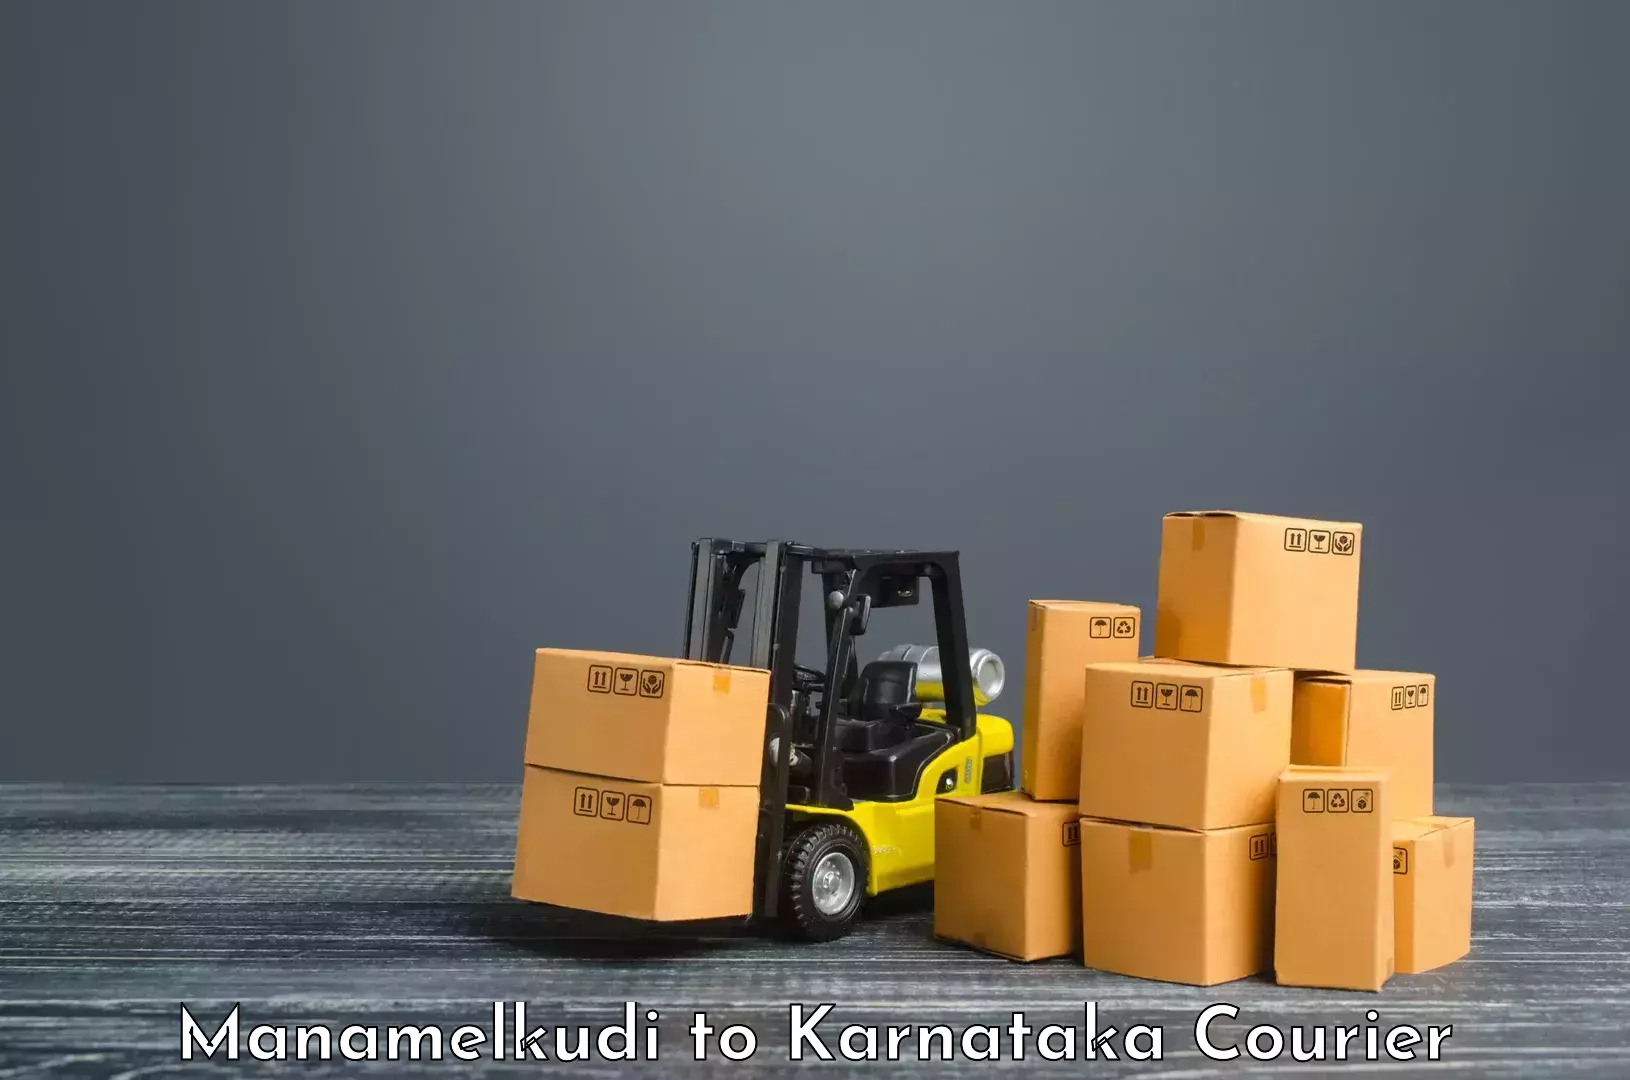 Cost-effective courier options Manamelkudi to Chikodi